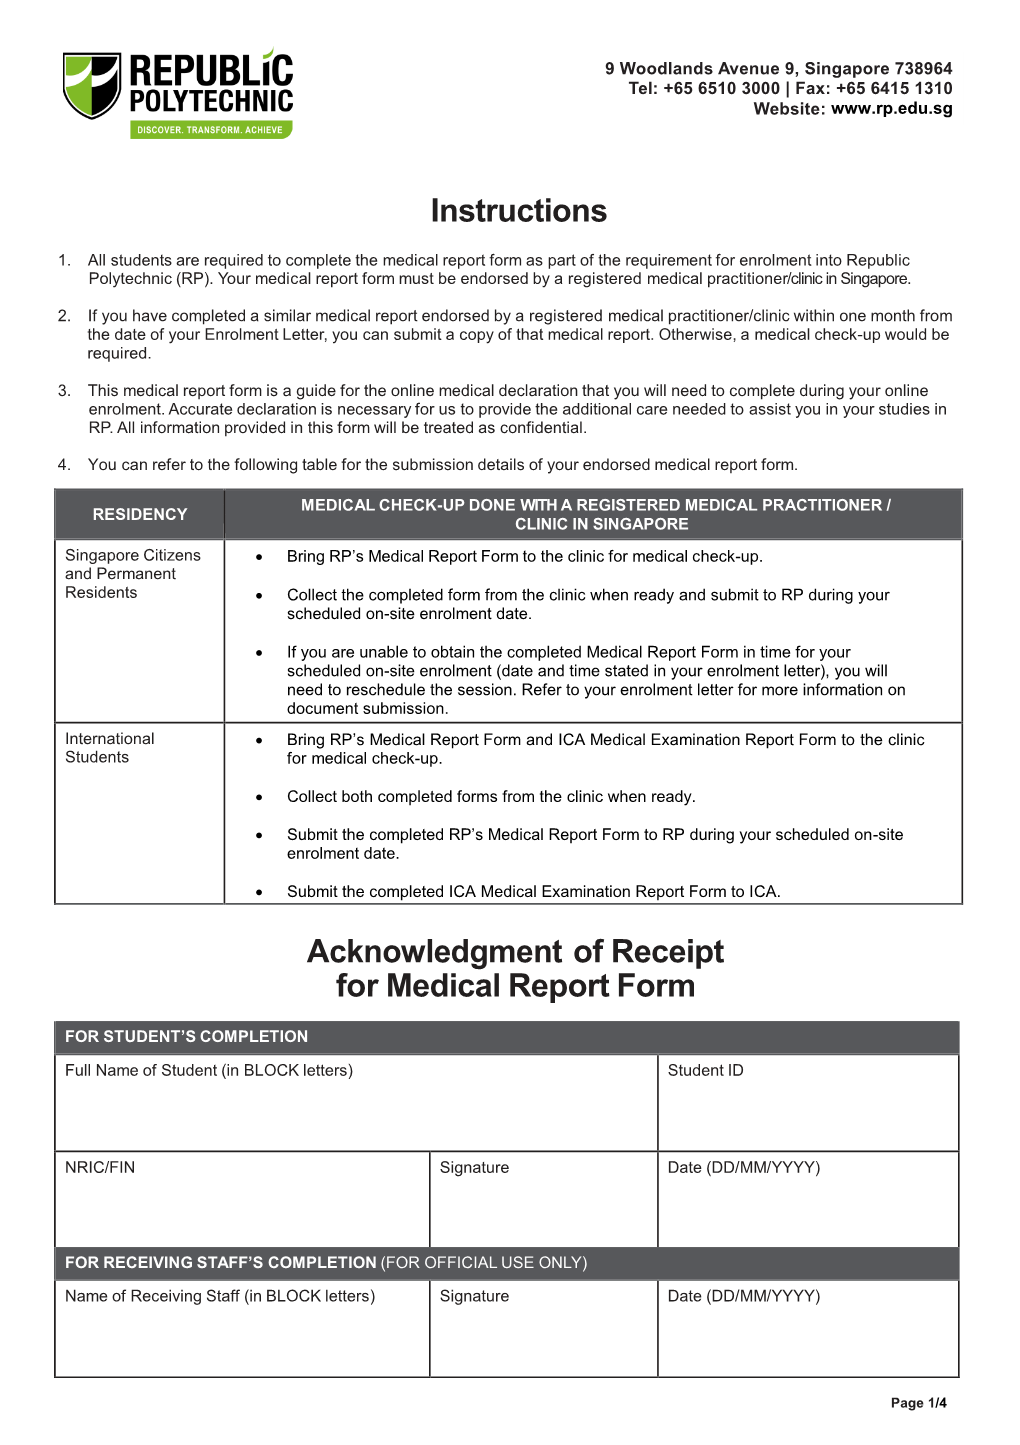 Instructions Acknowledgment of Receipt for Medical Report Form